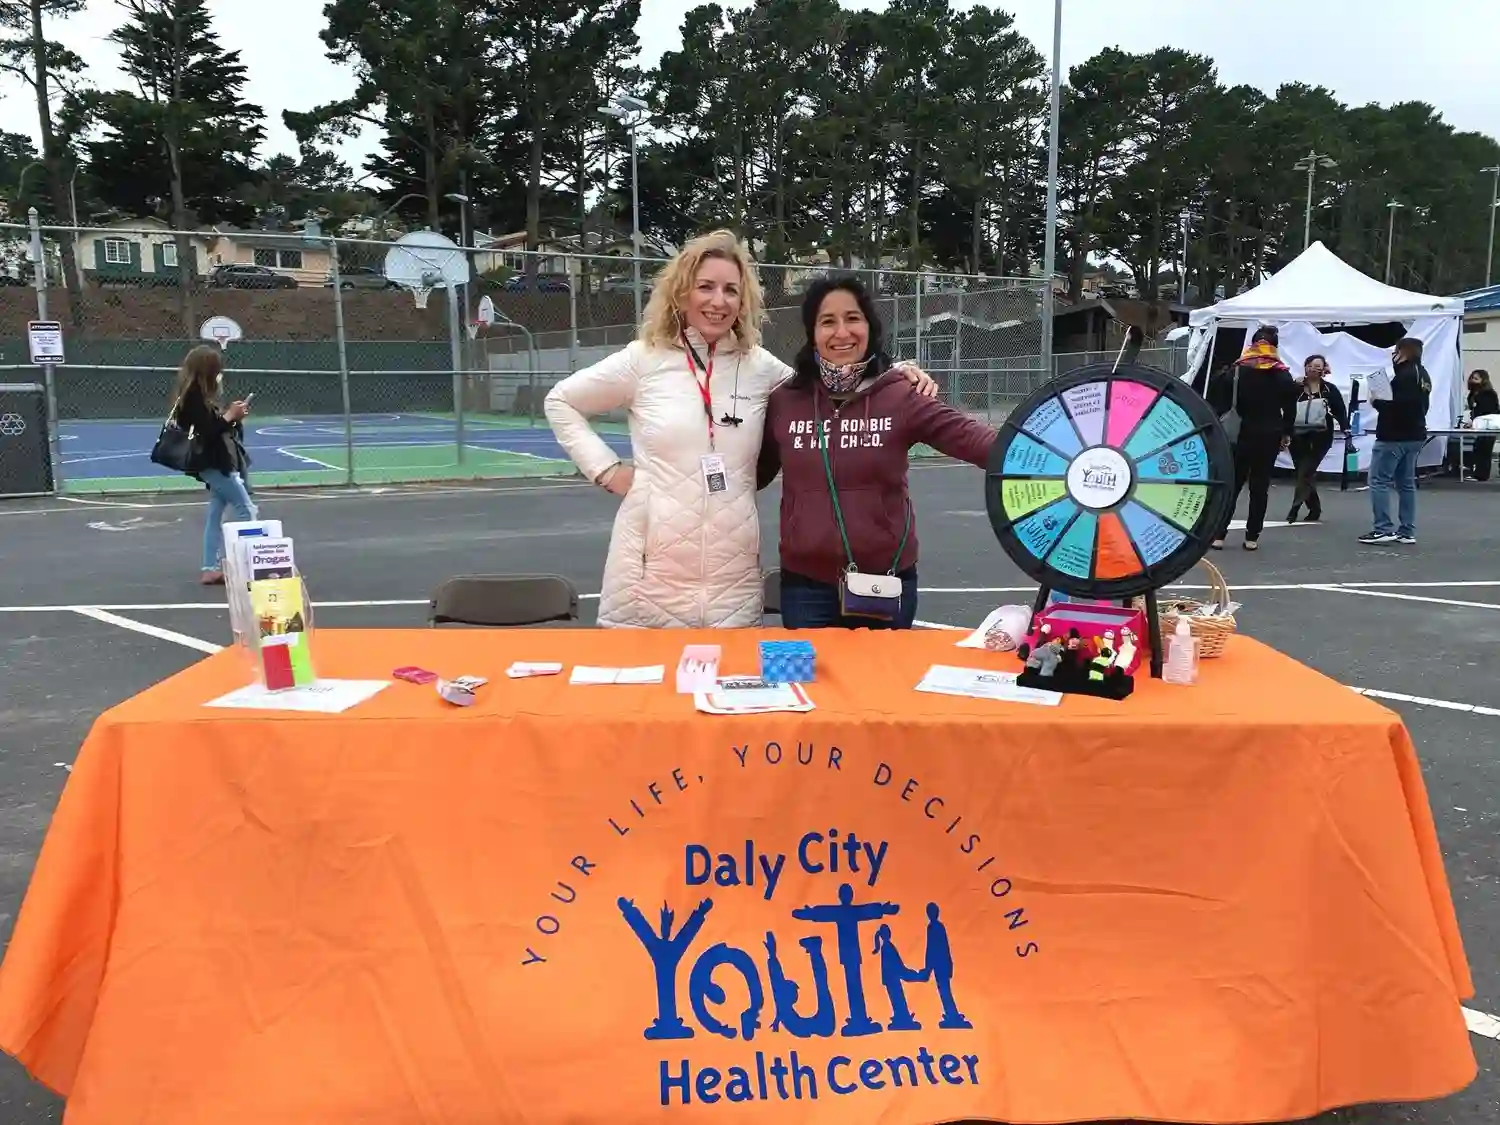 Daly City Youth